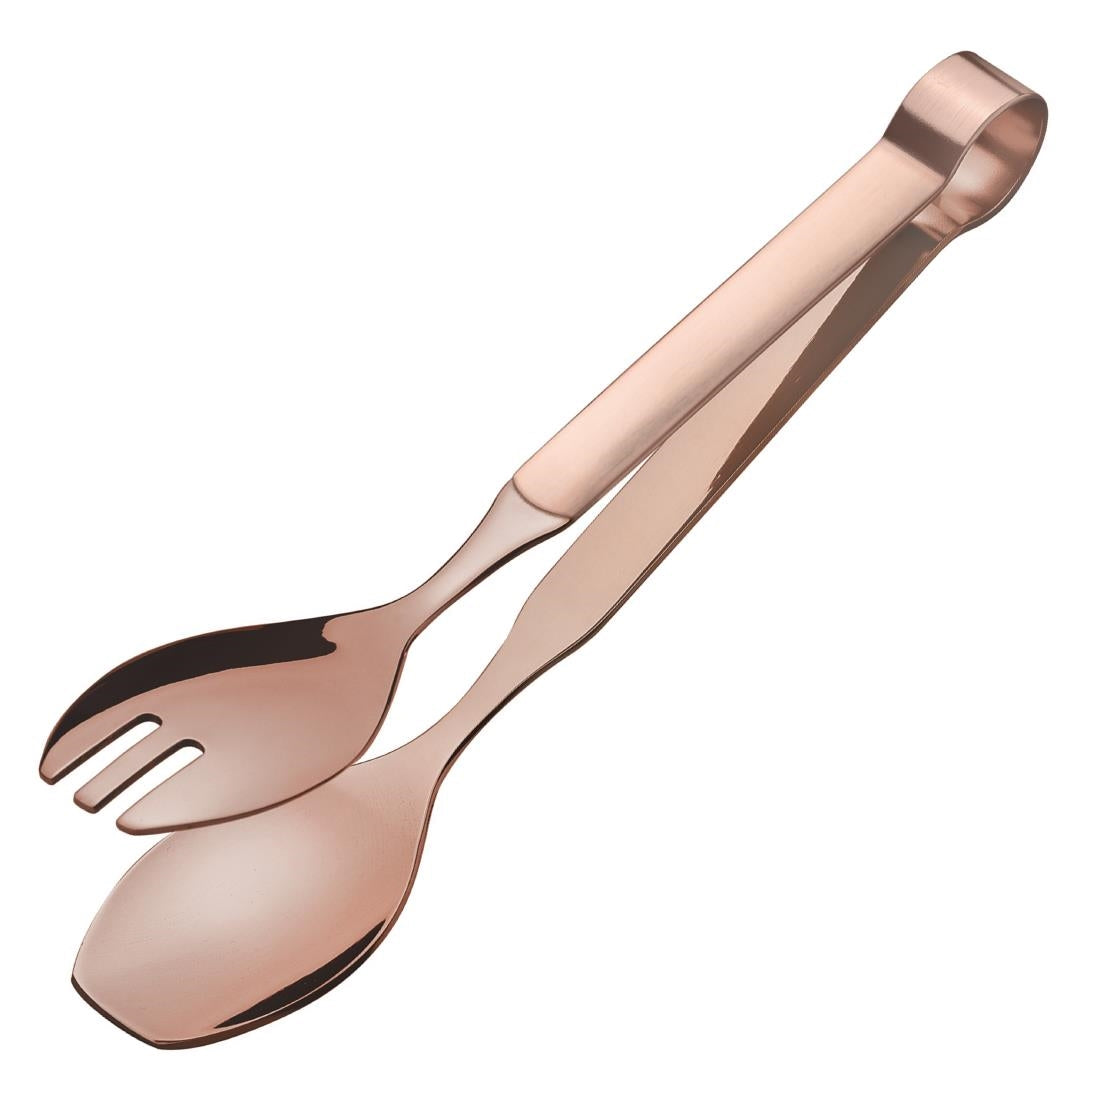 DX658 Amefa Buffet Small Serving Tongs Copper (Pack of 6)